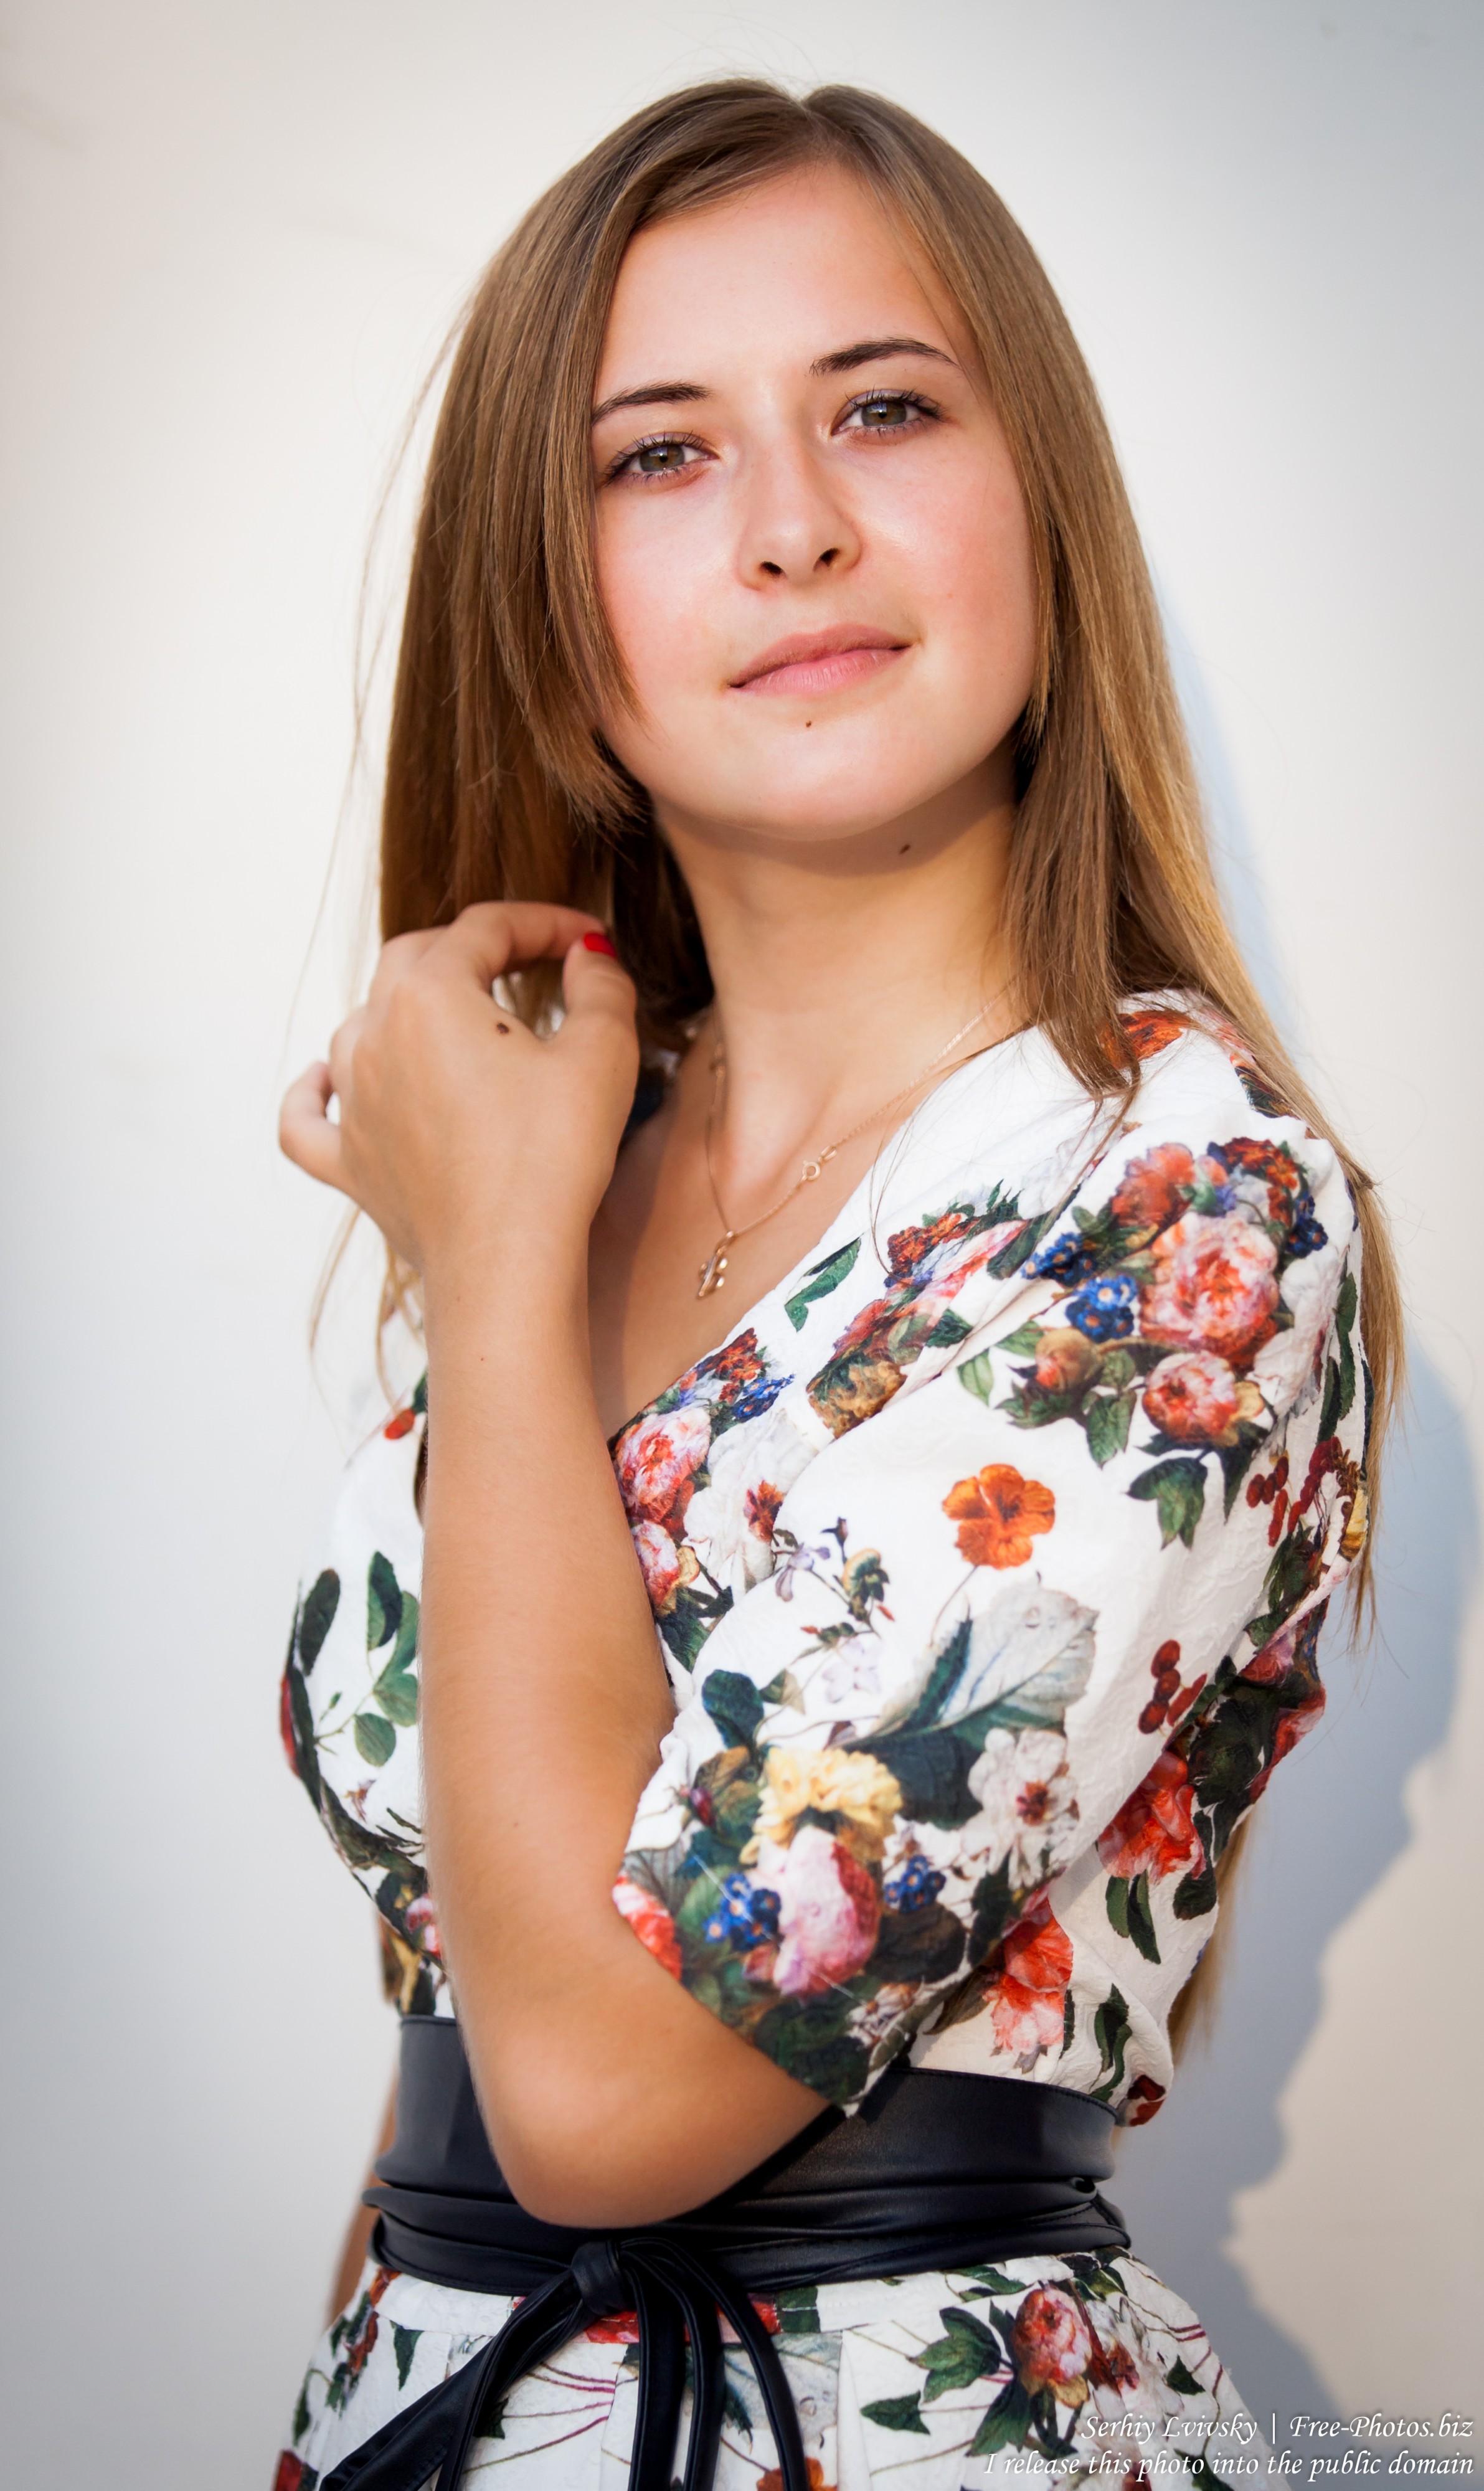 an 18-year-old girl photographed by Serhiy Lvivsky in August 2015, picture 6